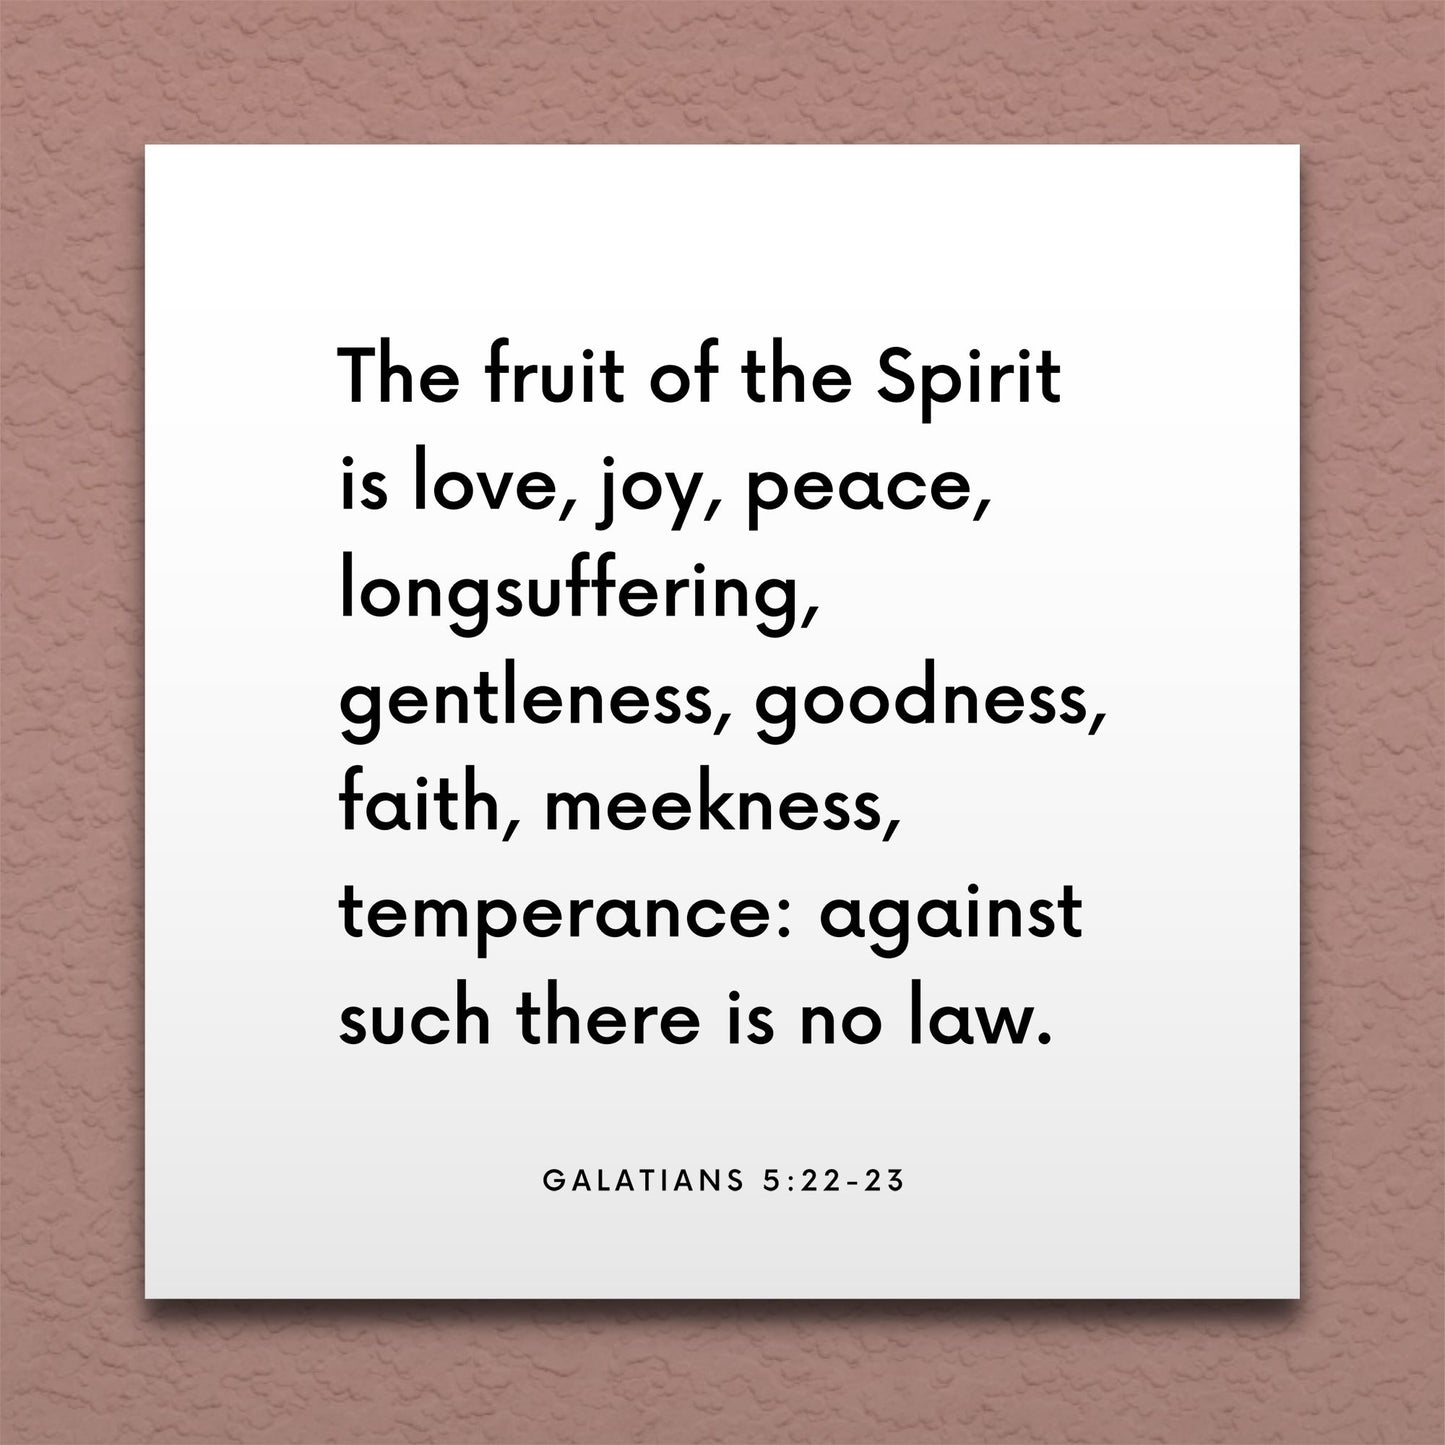 Wall-mounted scripture tile for Galatians 5:22-23 - "The fruit of the Spirit is love, joy, peace"